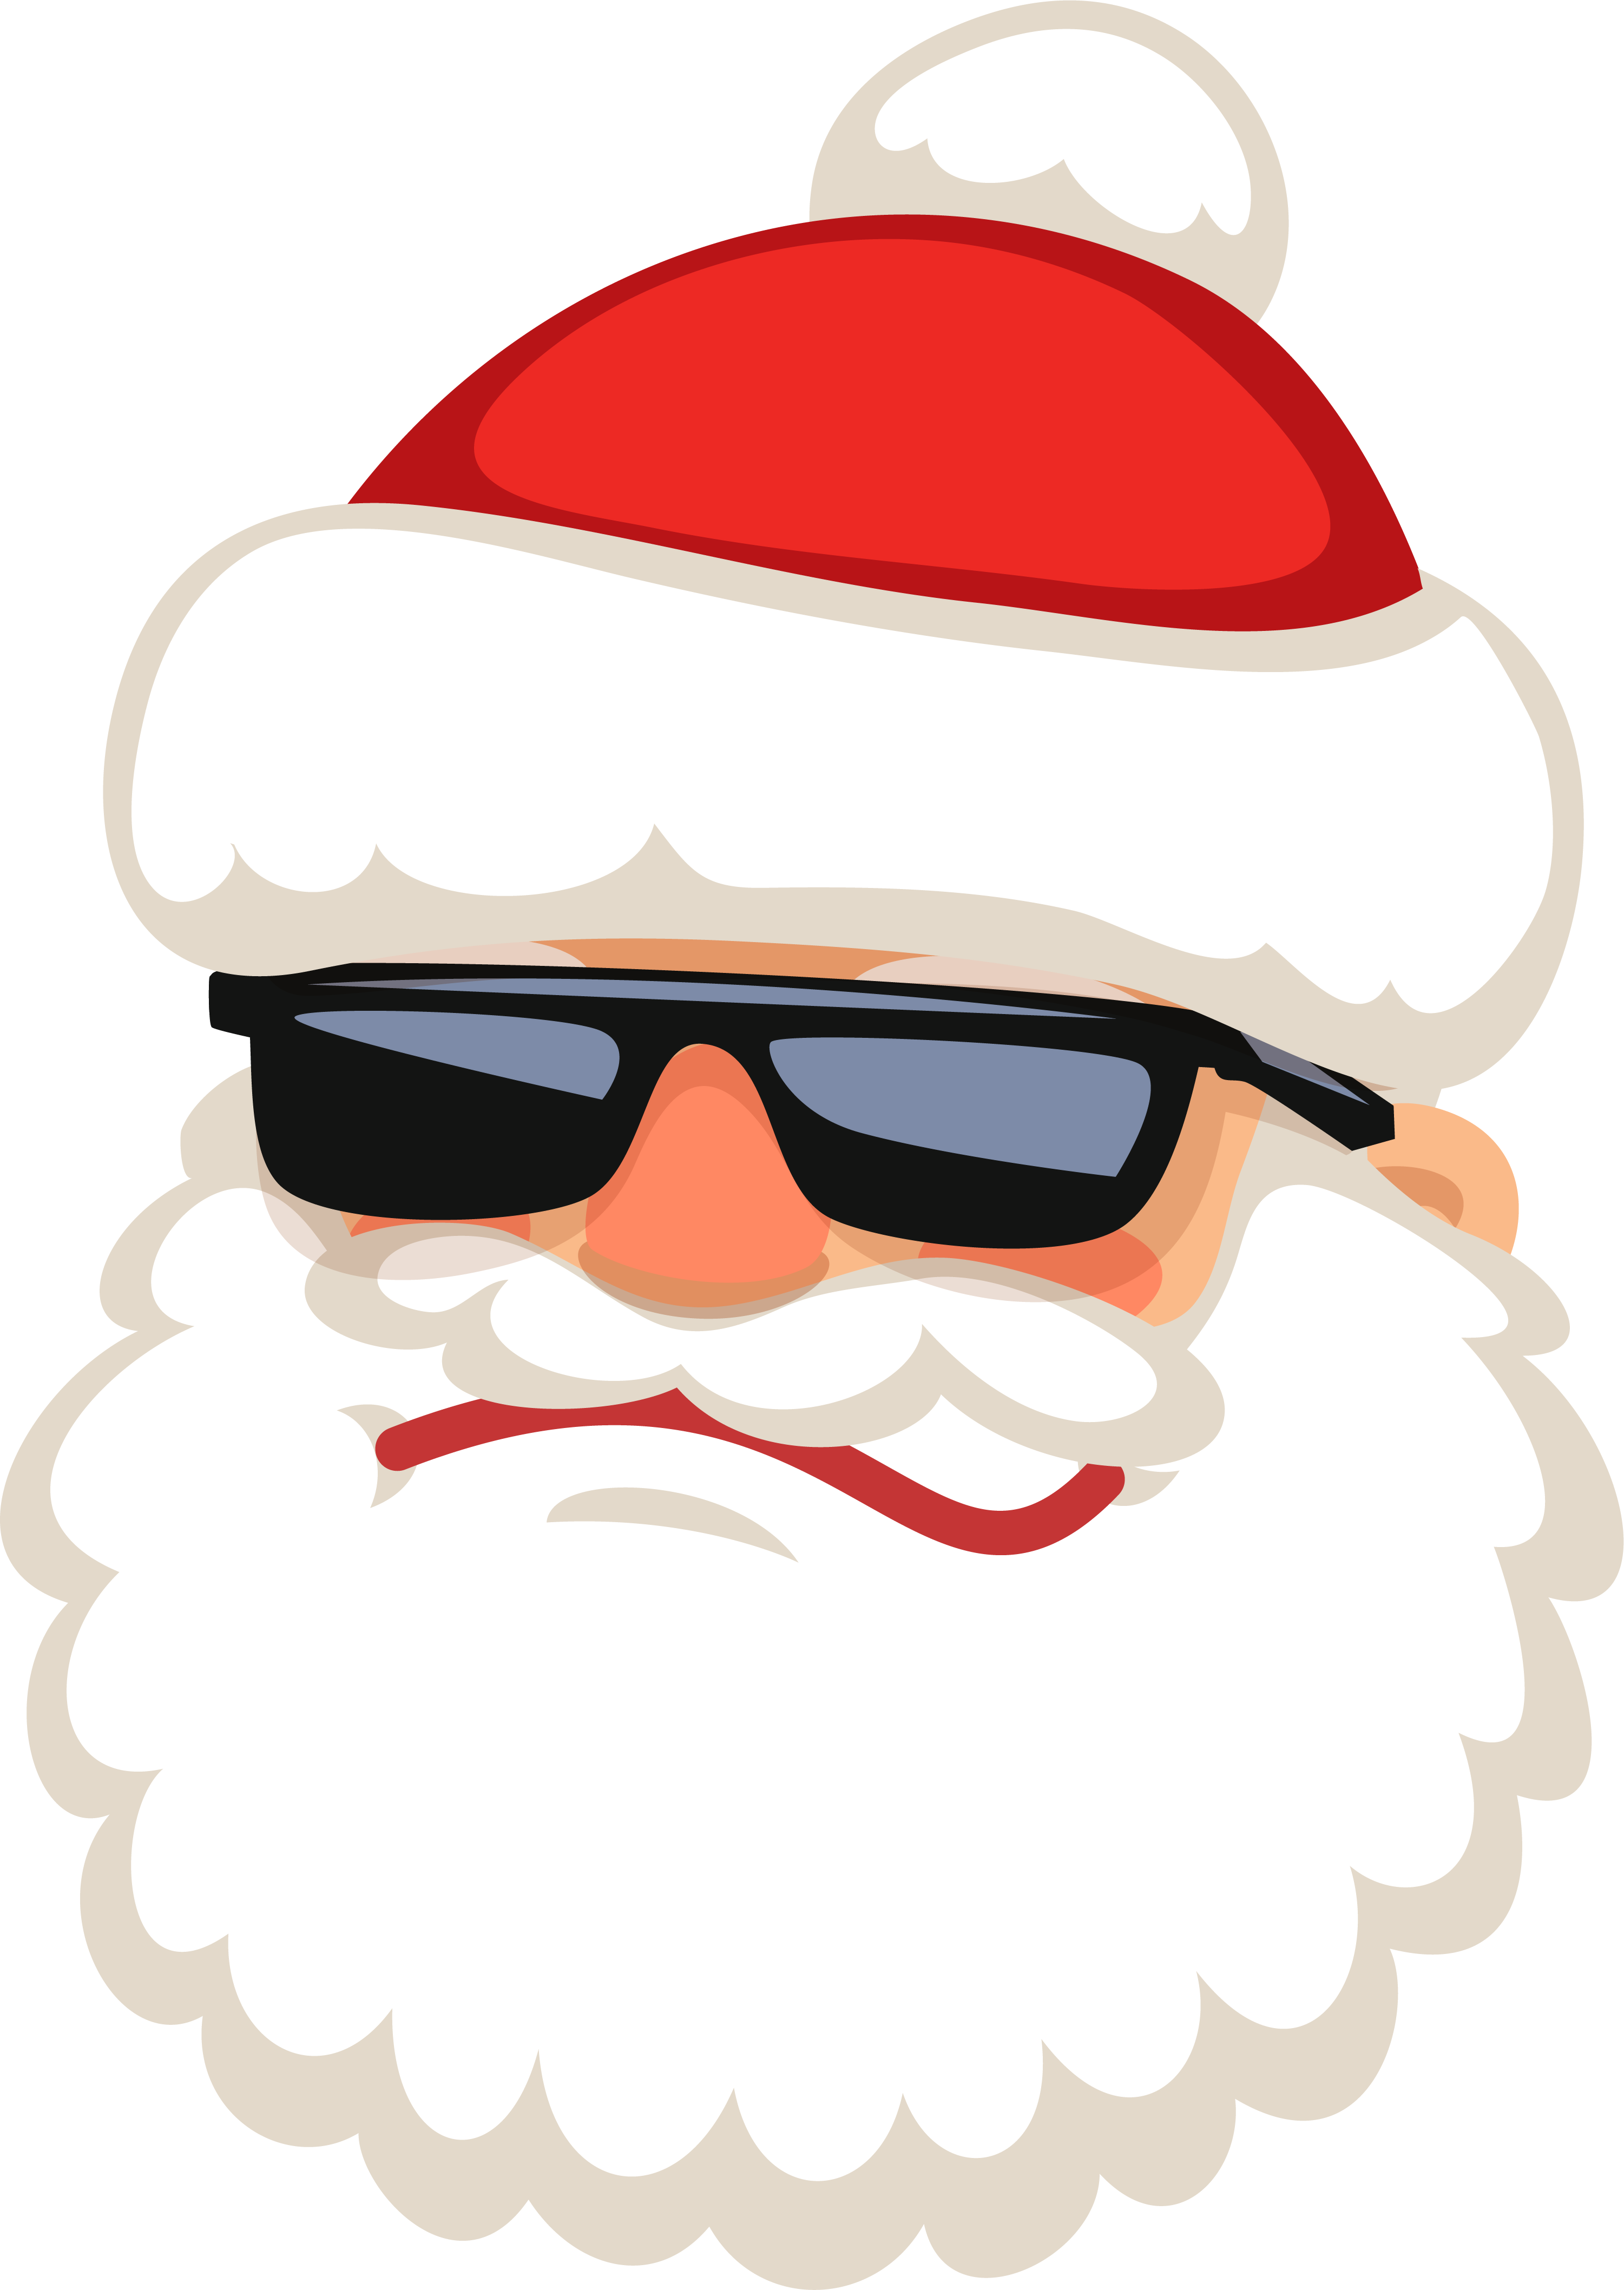 Reindeer Claus Santa Handsome Free Photo PNG Clipart